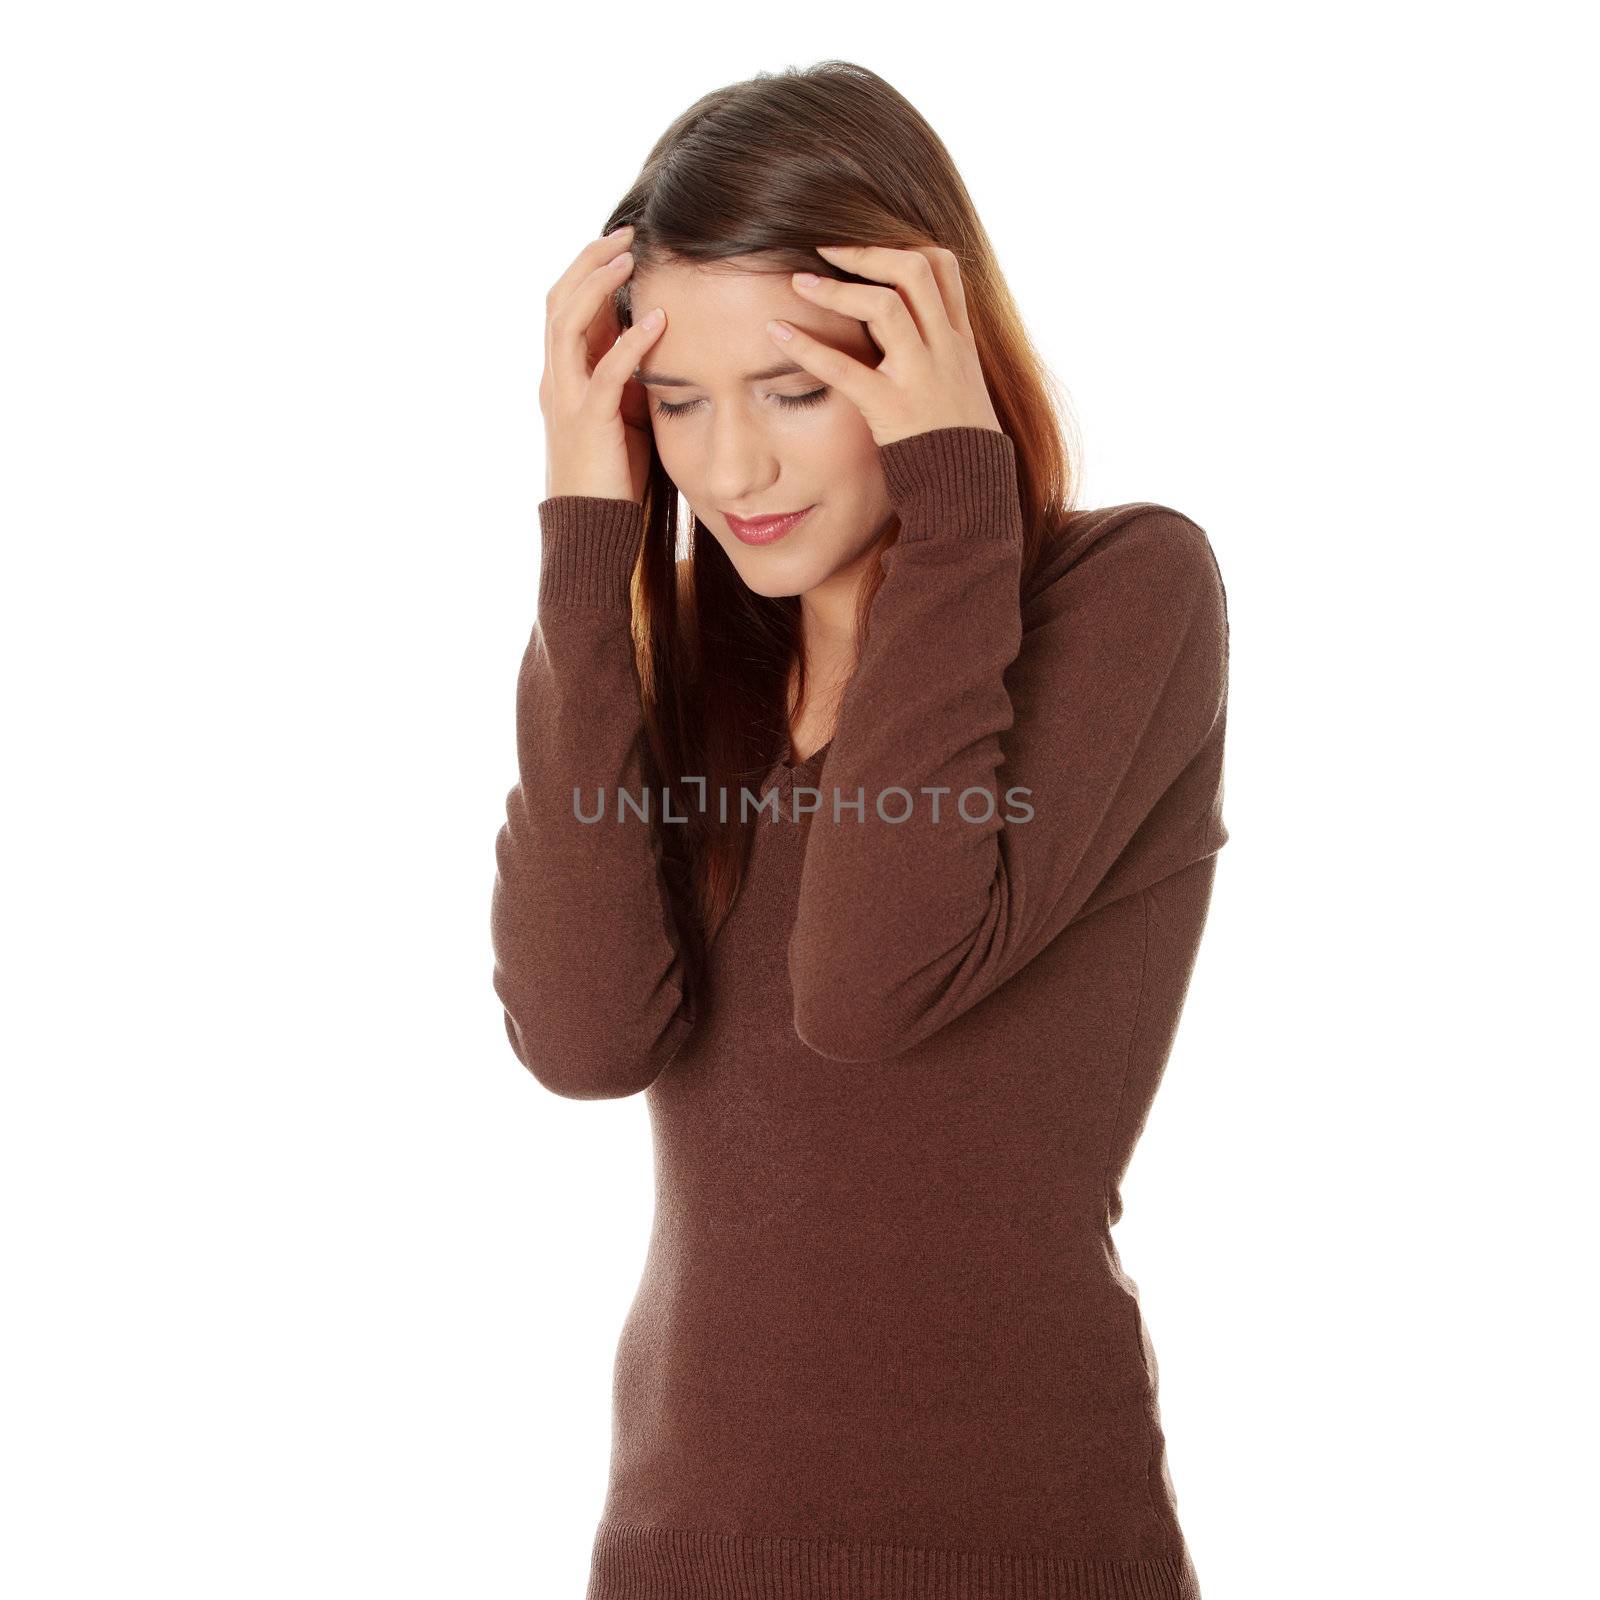 Woman with headache holding her hand to the head, isolated on white